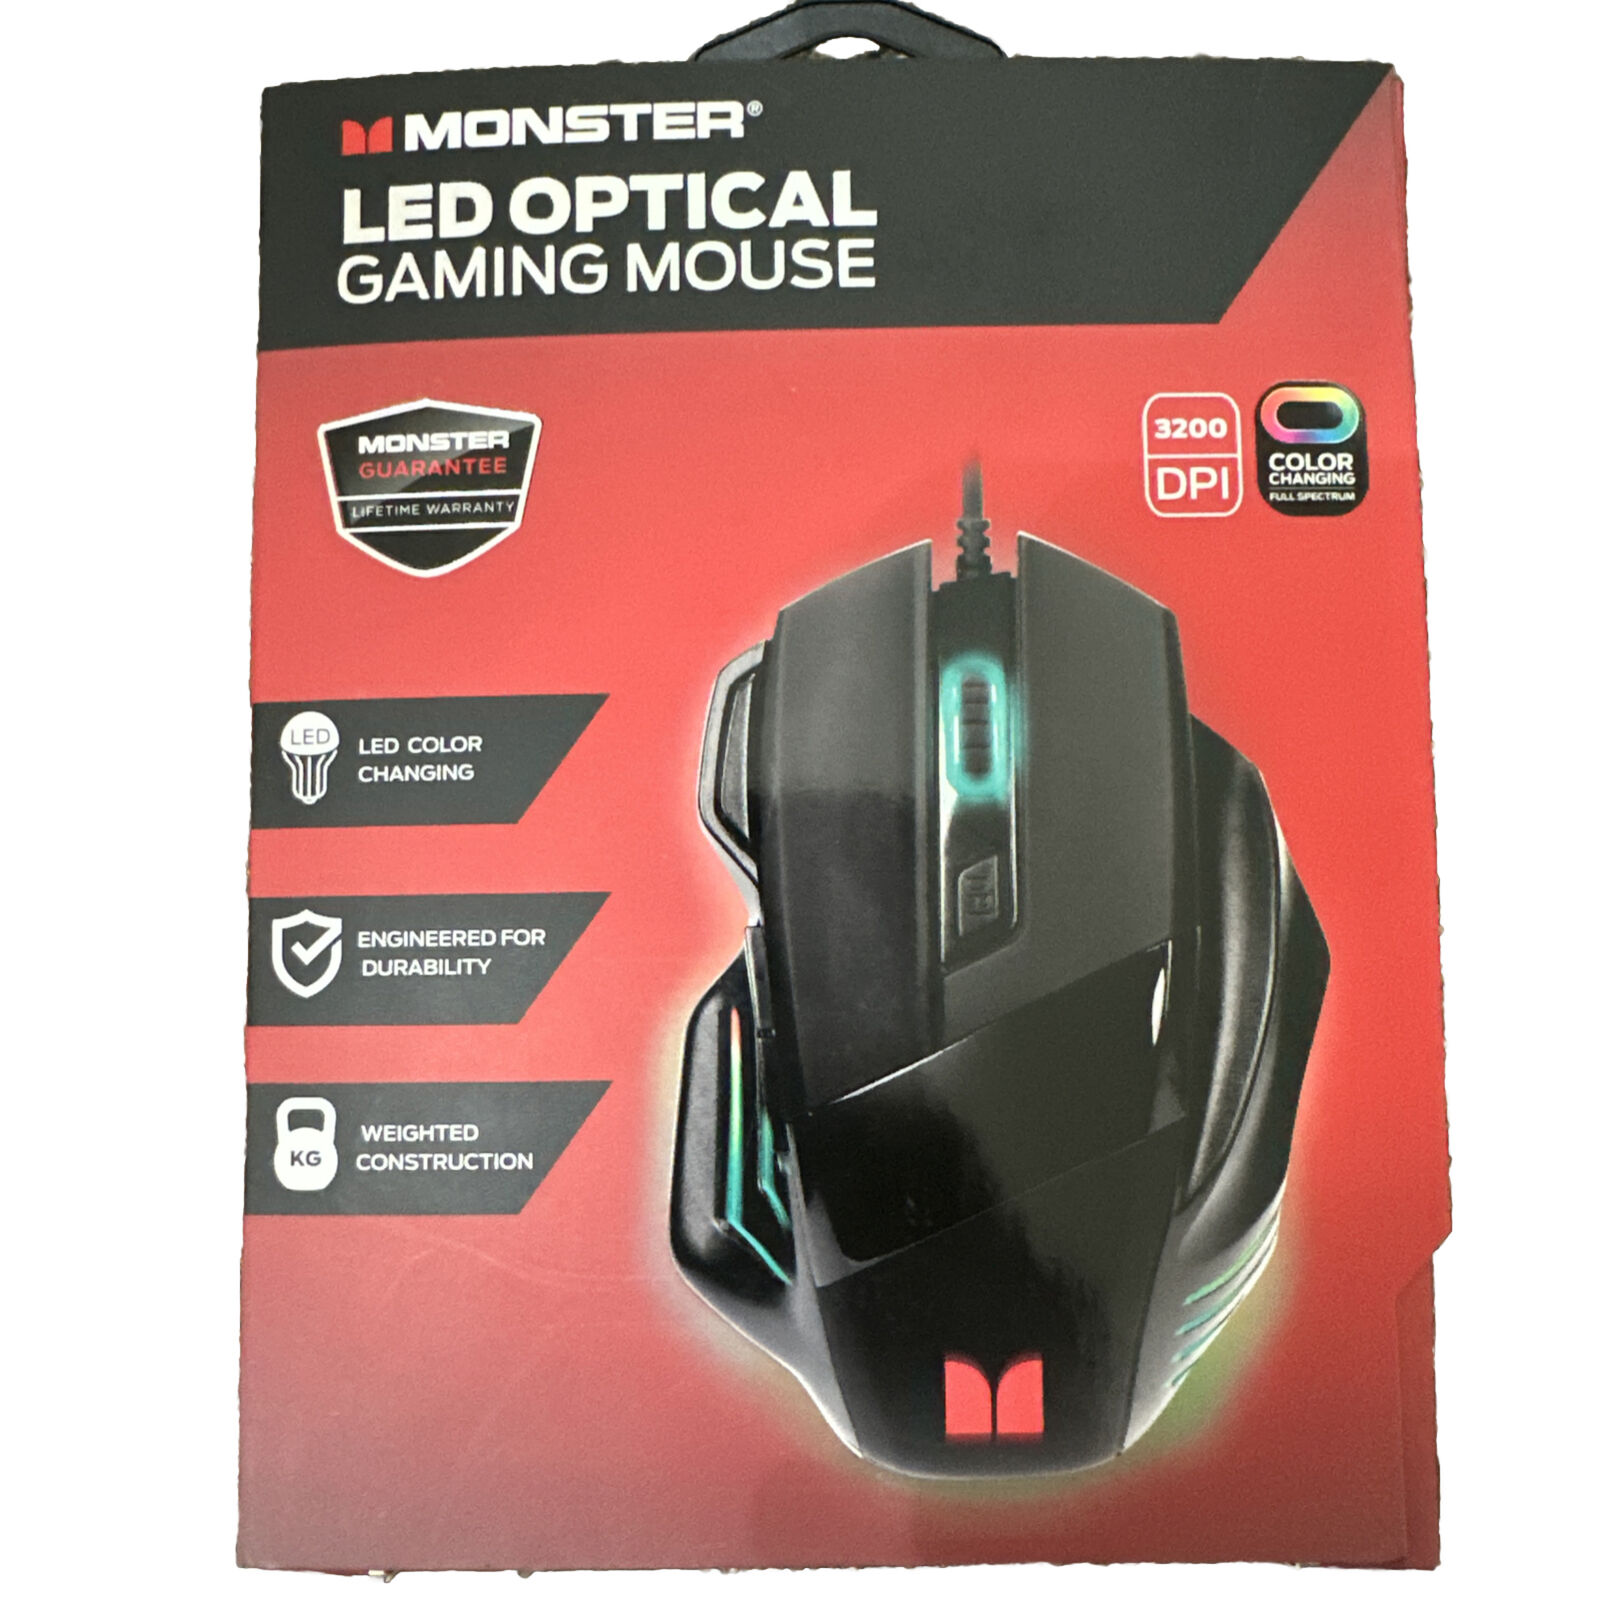 MONSTER LED OPTICAL GAMING MOUSE - RGB NEW IN BOX